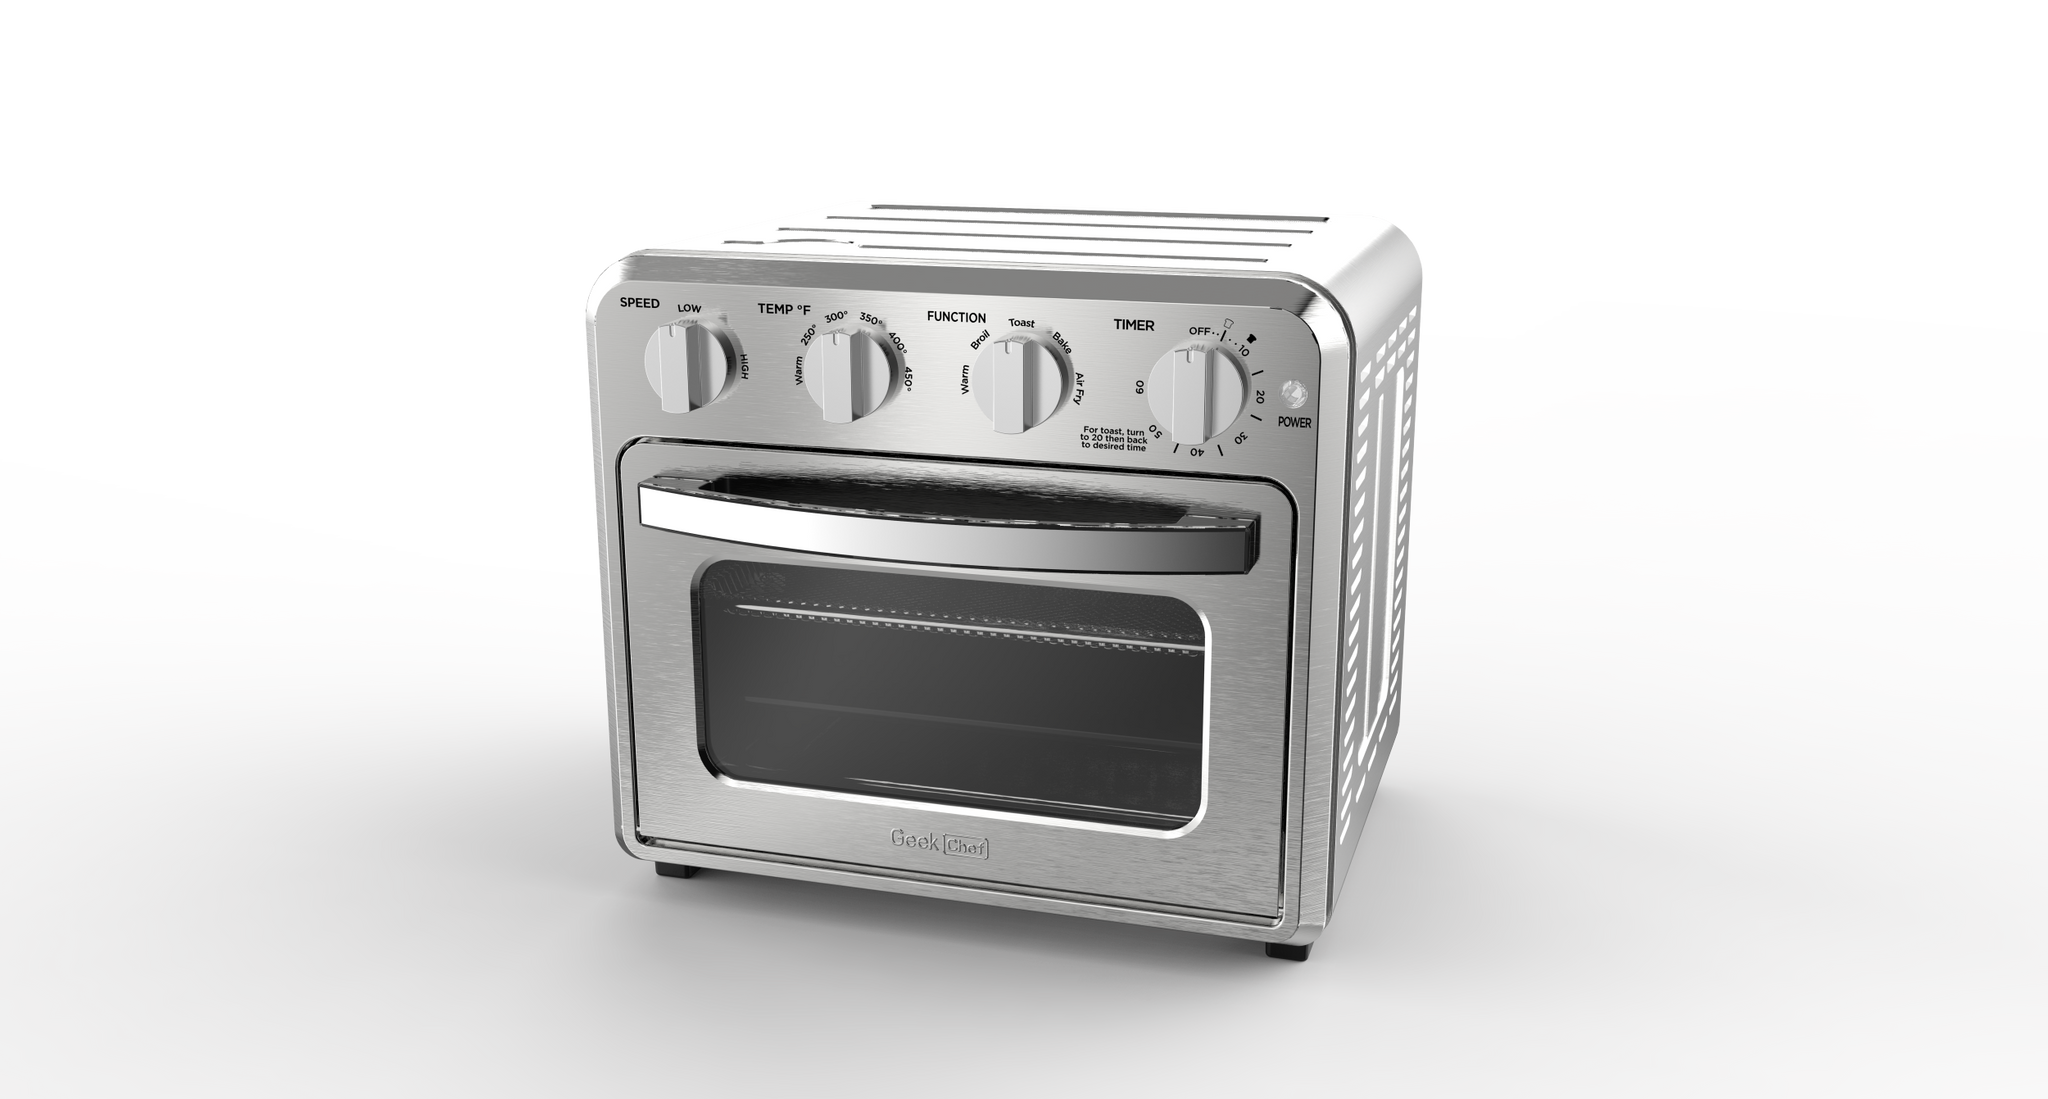 Geek Chef Air Fryer Toaster Oven Combo, 4 Slice silver-stainless steel